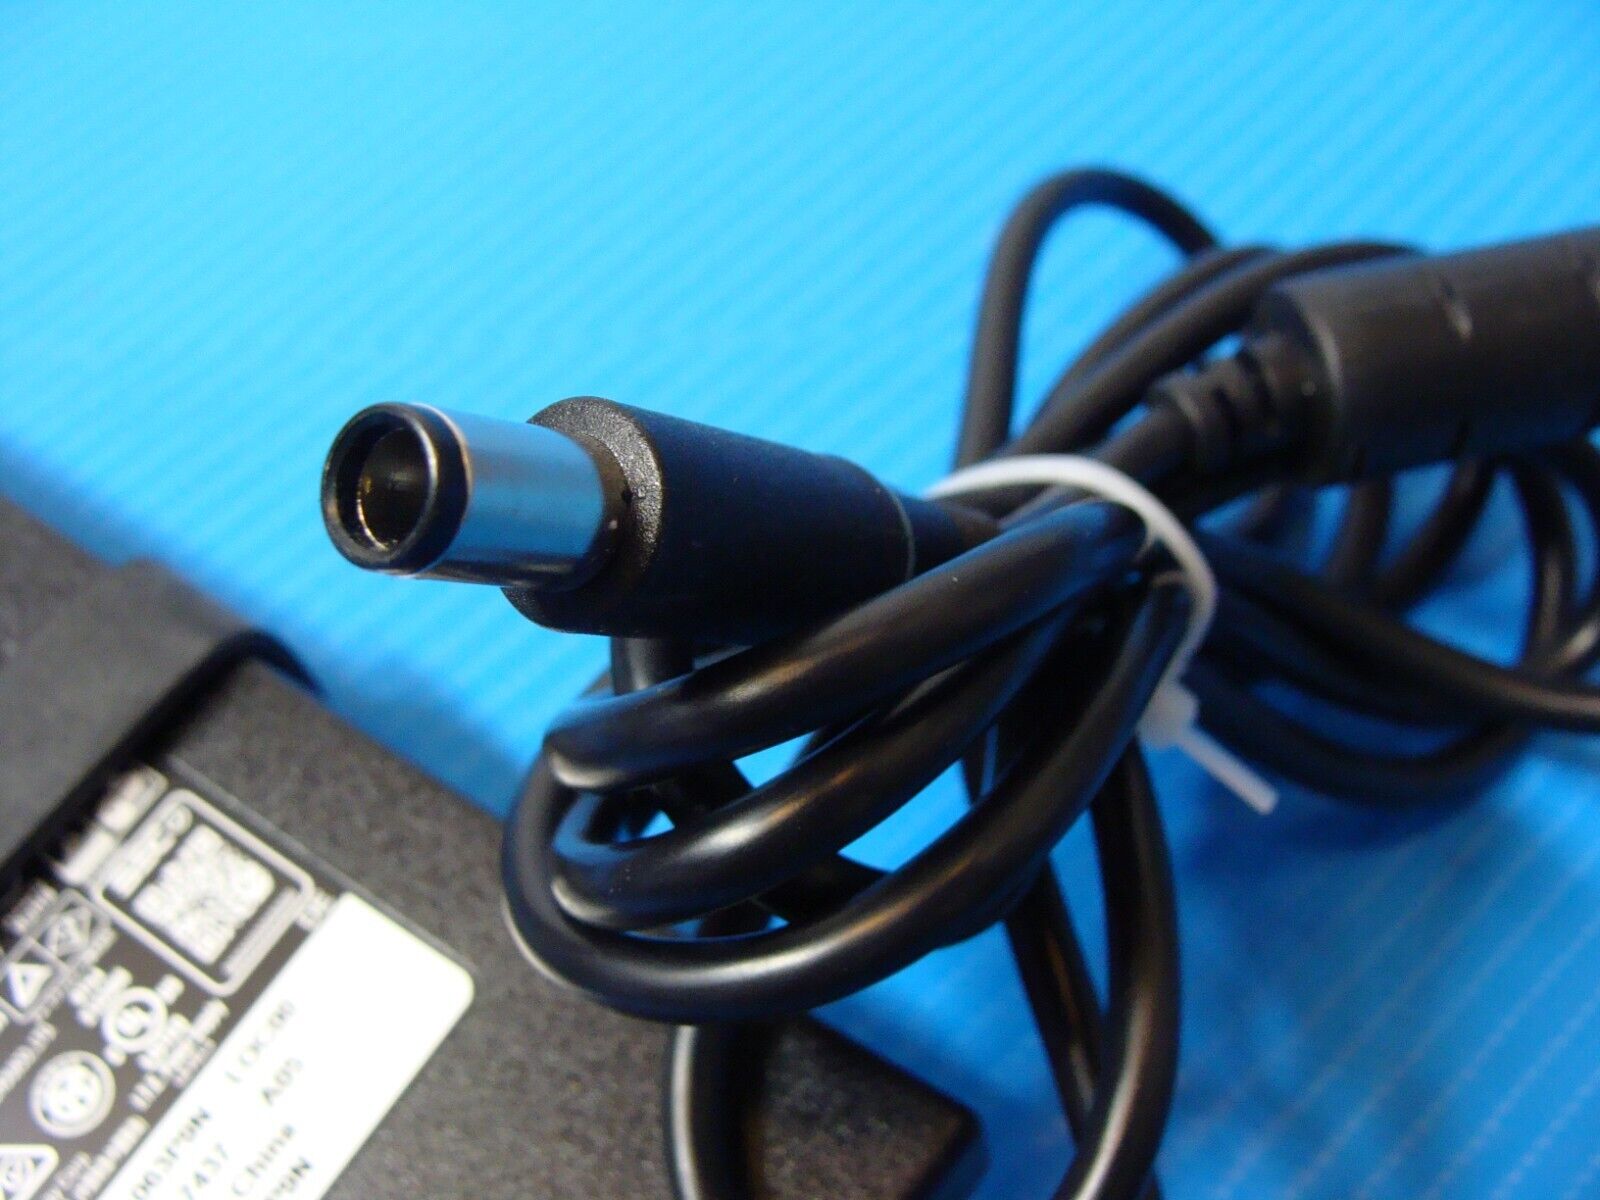 Genuine Dell AC Power Adapter Charger 19.5V 6.7A 130W  LA130PM190 063P9N